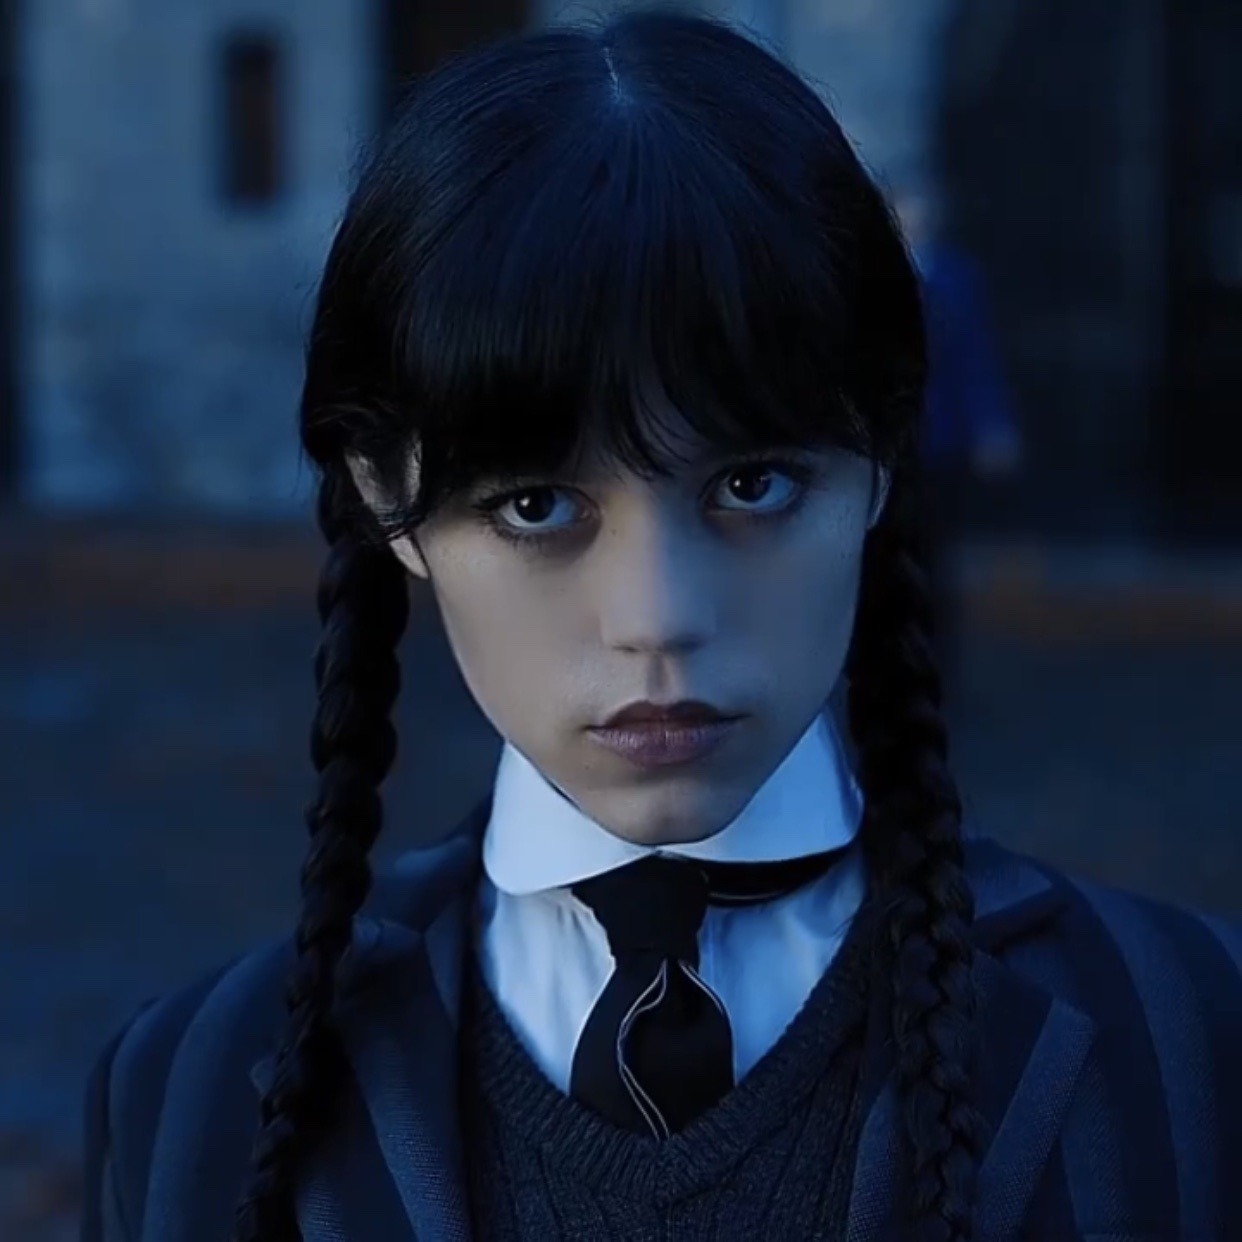 https://www.youloveit.com/uploads/posts/2022-12/1670514187_youloveit_com_wednesday_addams_profile_images01.jpg